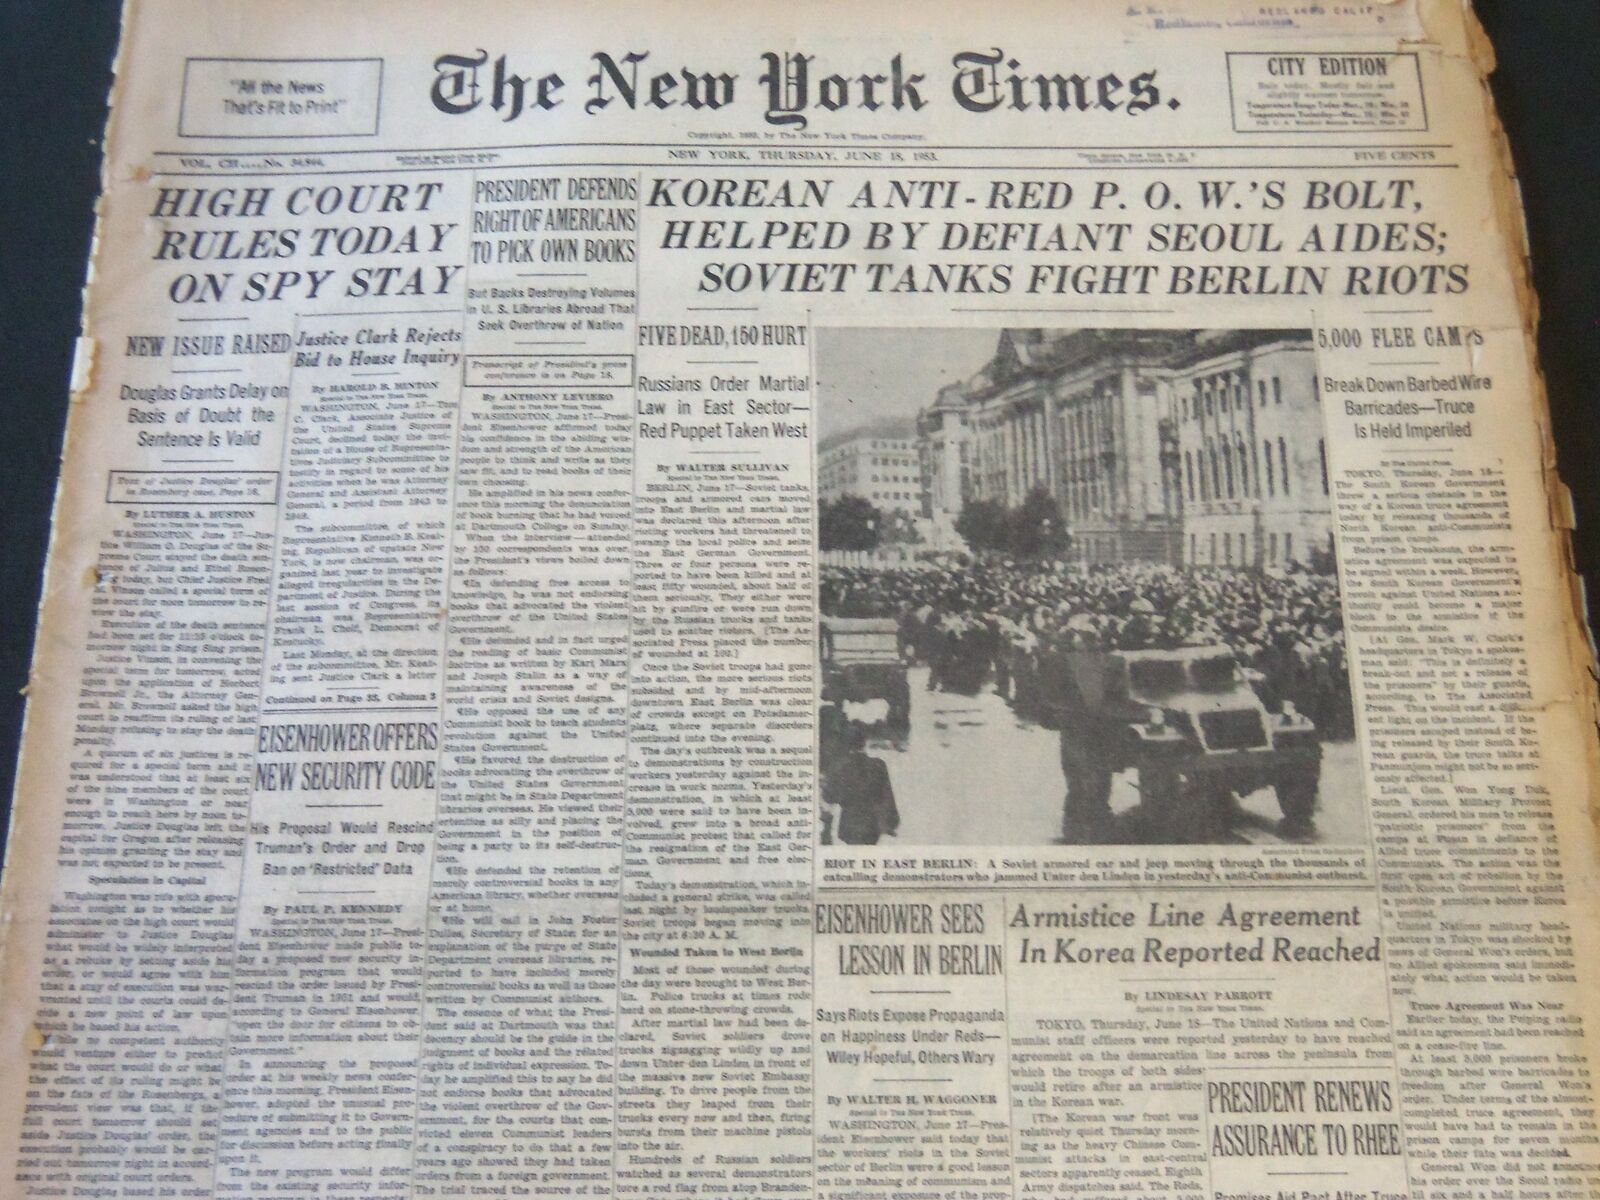 1953 JUNE 18 NEW YORK TIMES - HIGH COURT RULES TODAY ON SPY STAY - NT 6311